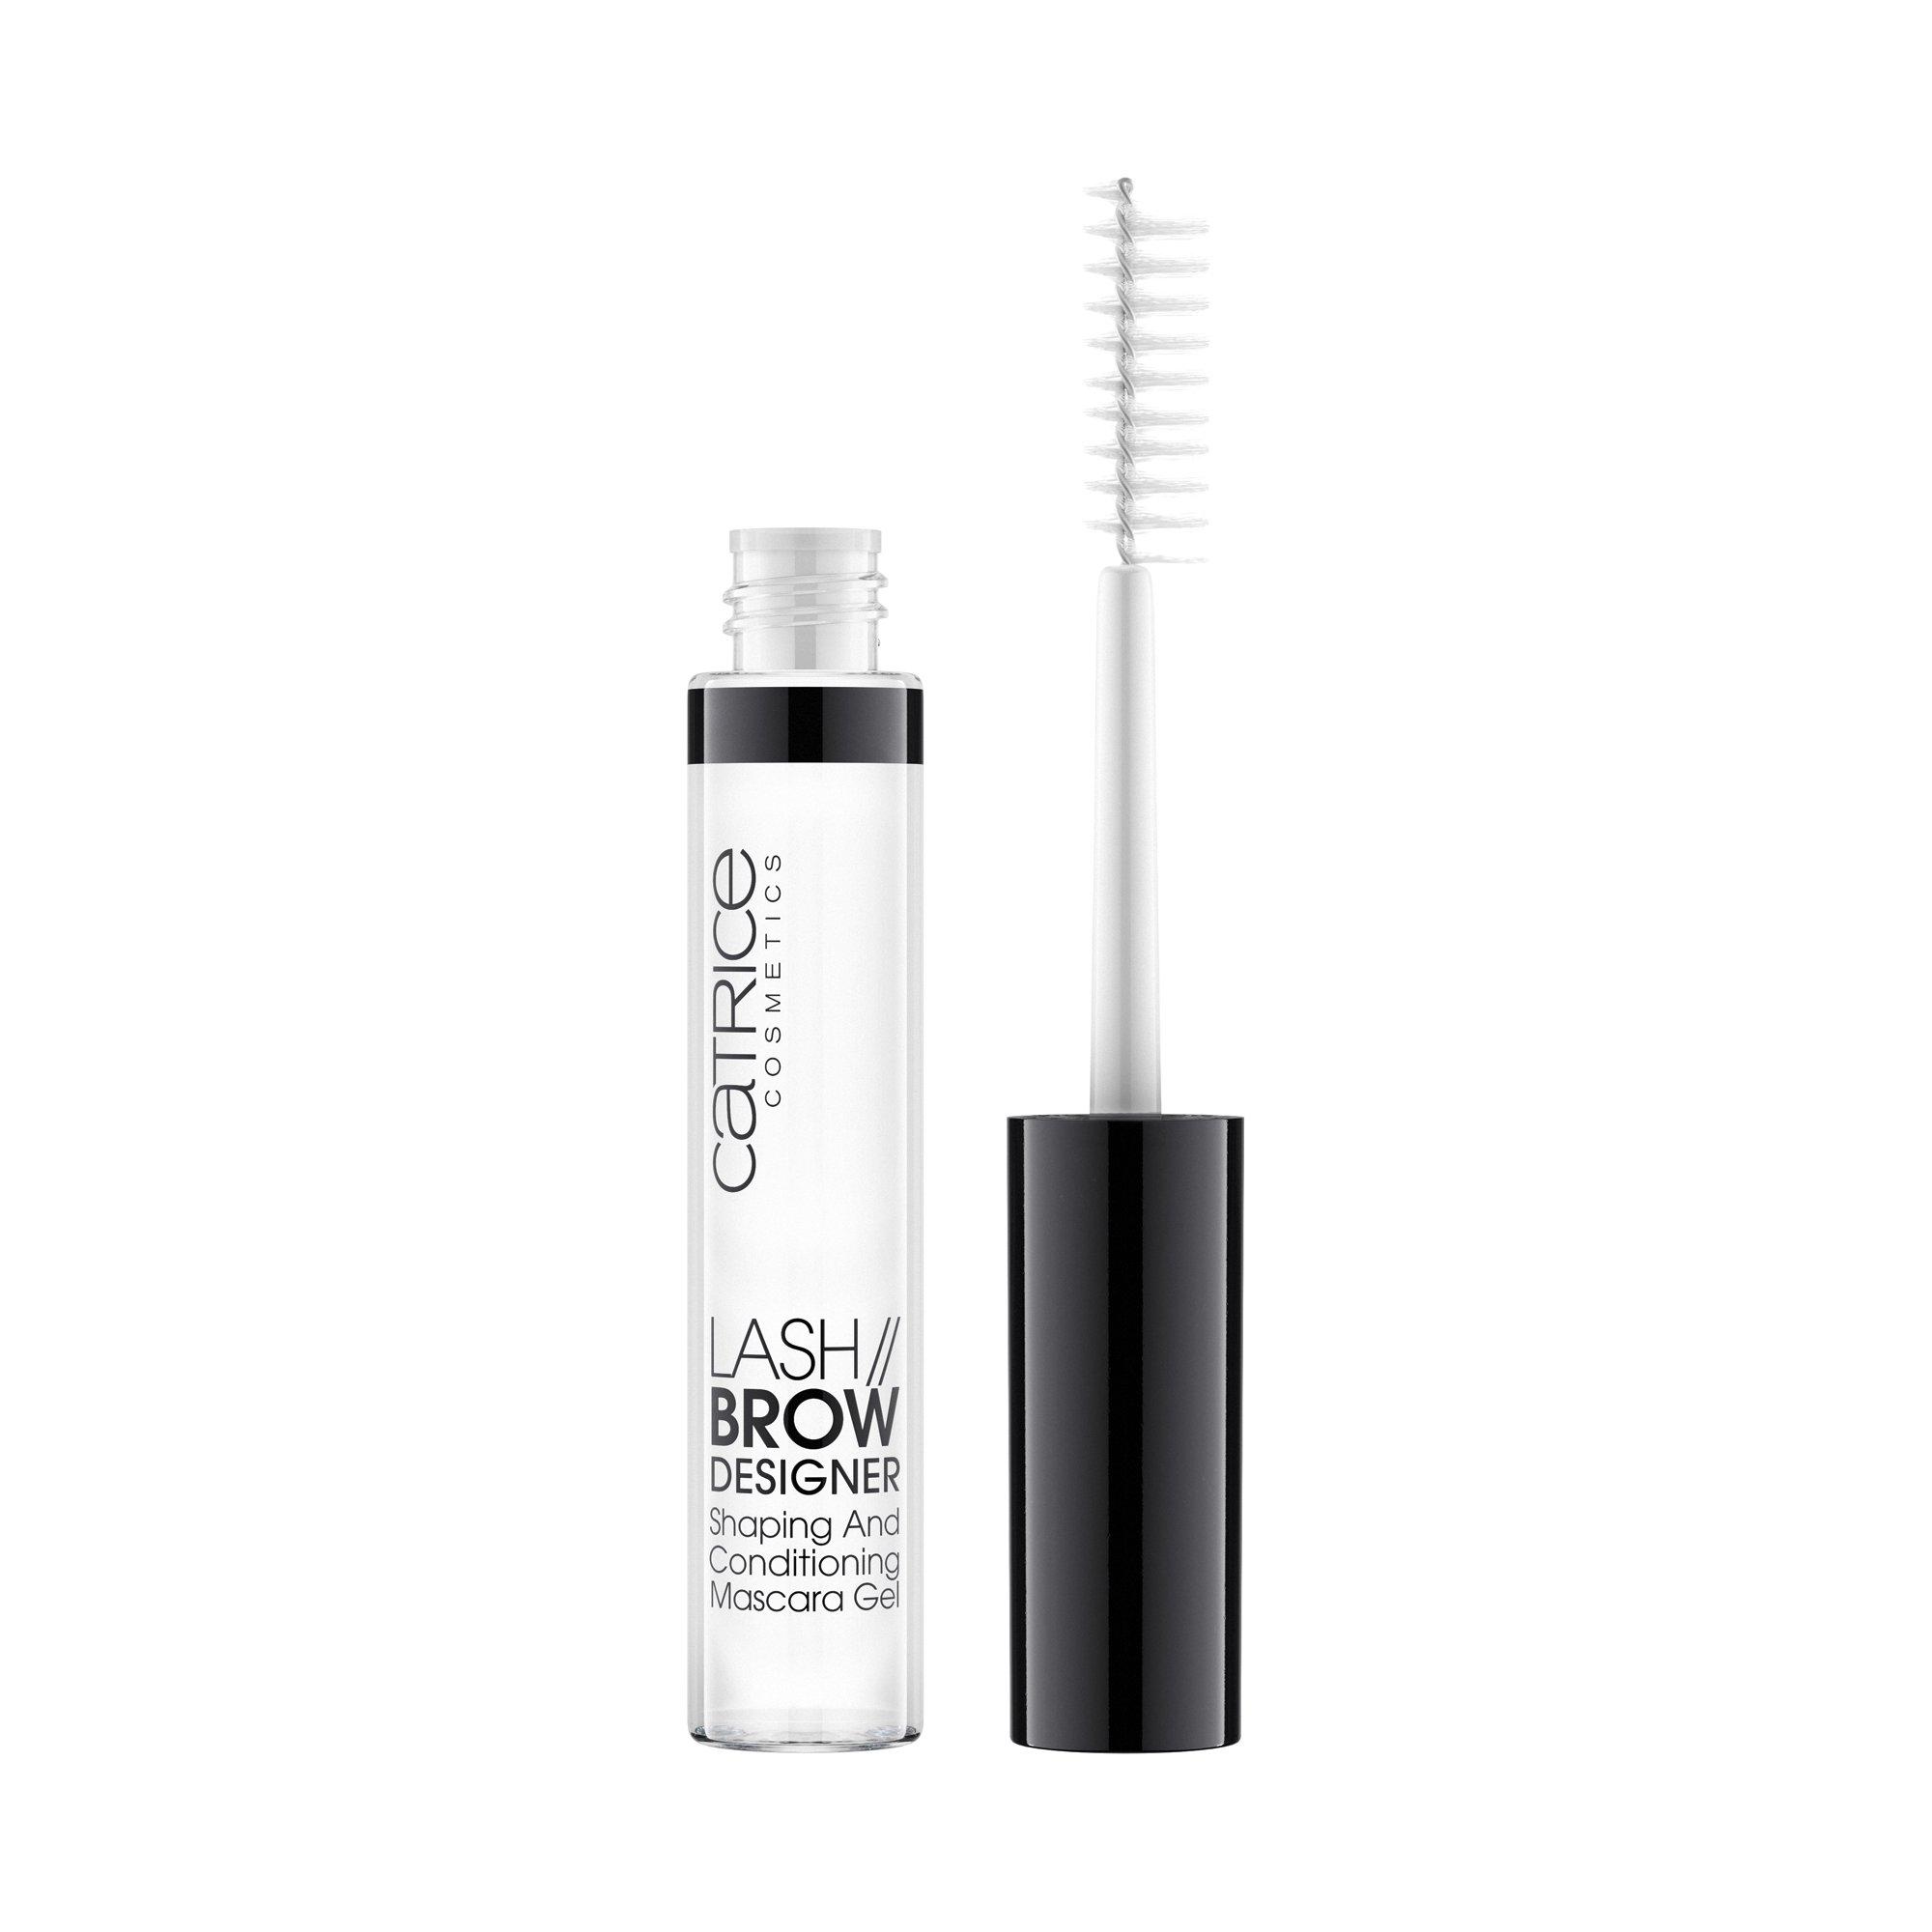 Image of CATRICE Lash Brow Designer Shaping And Conditioning Mascara Gel - 6ml